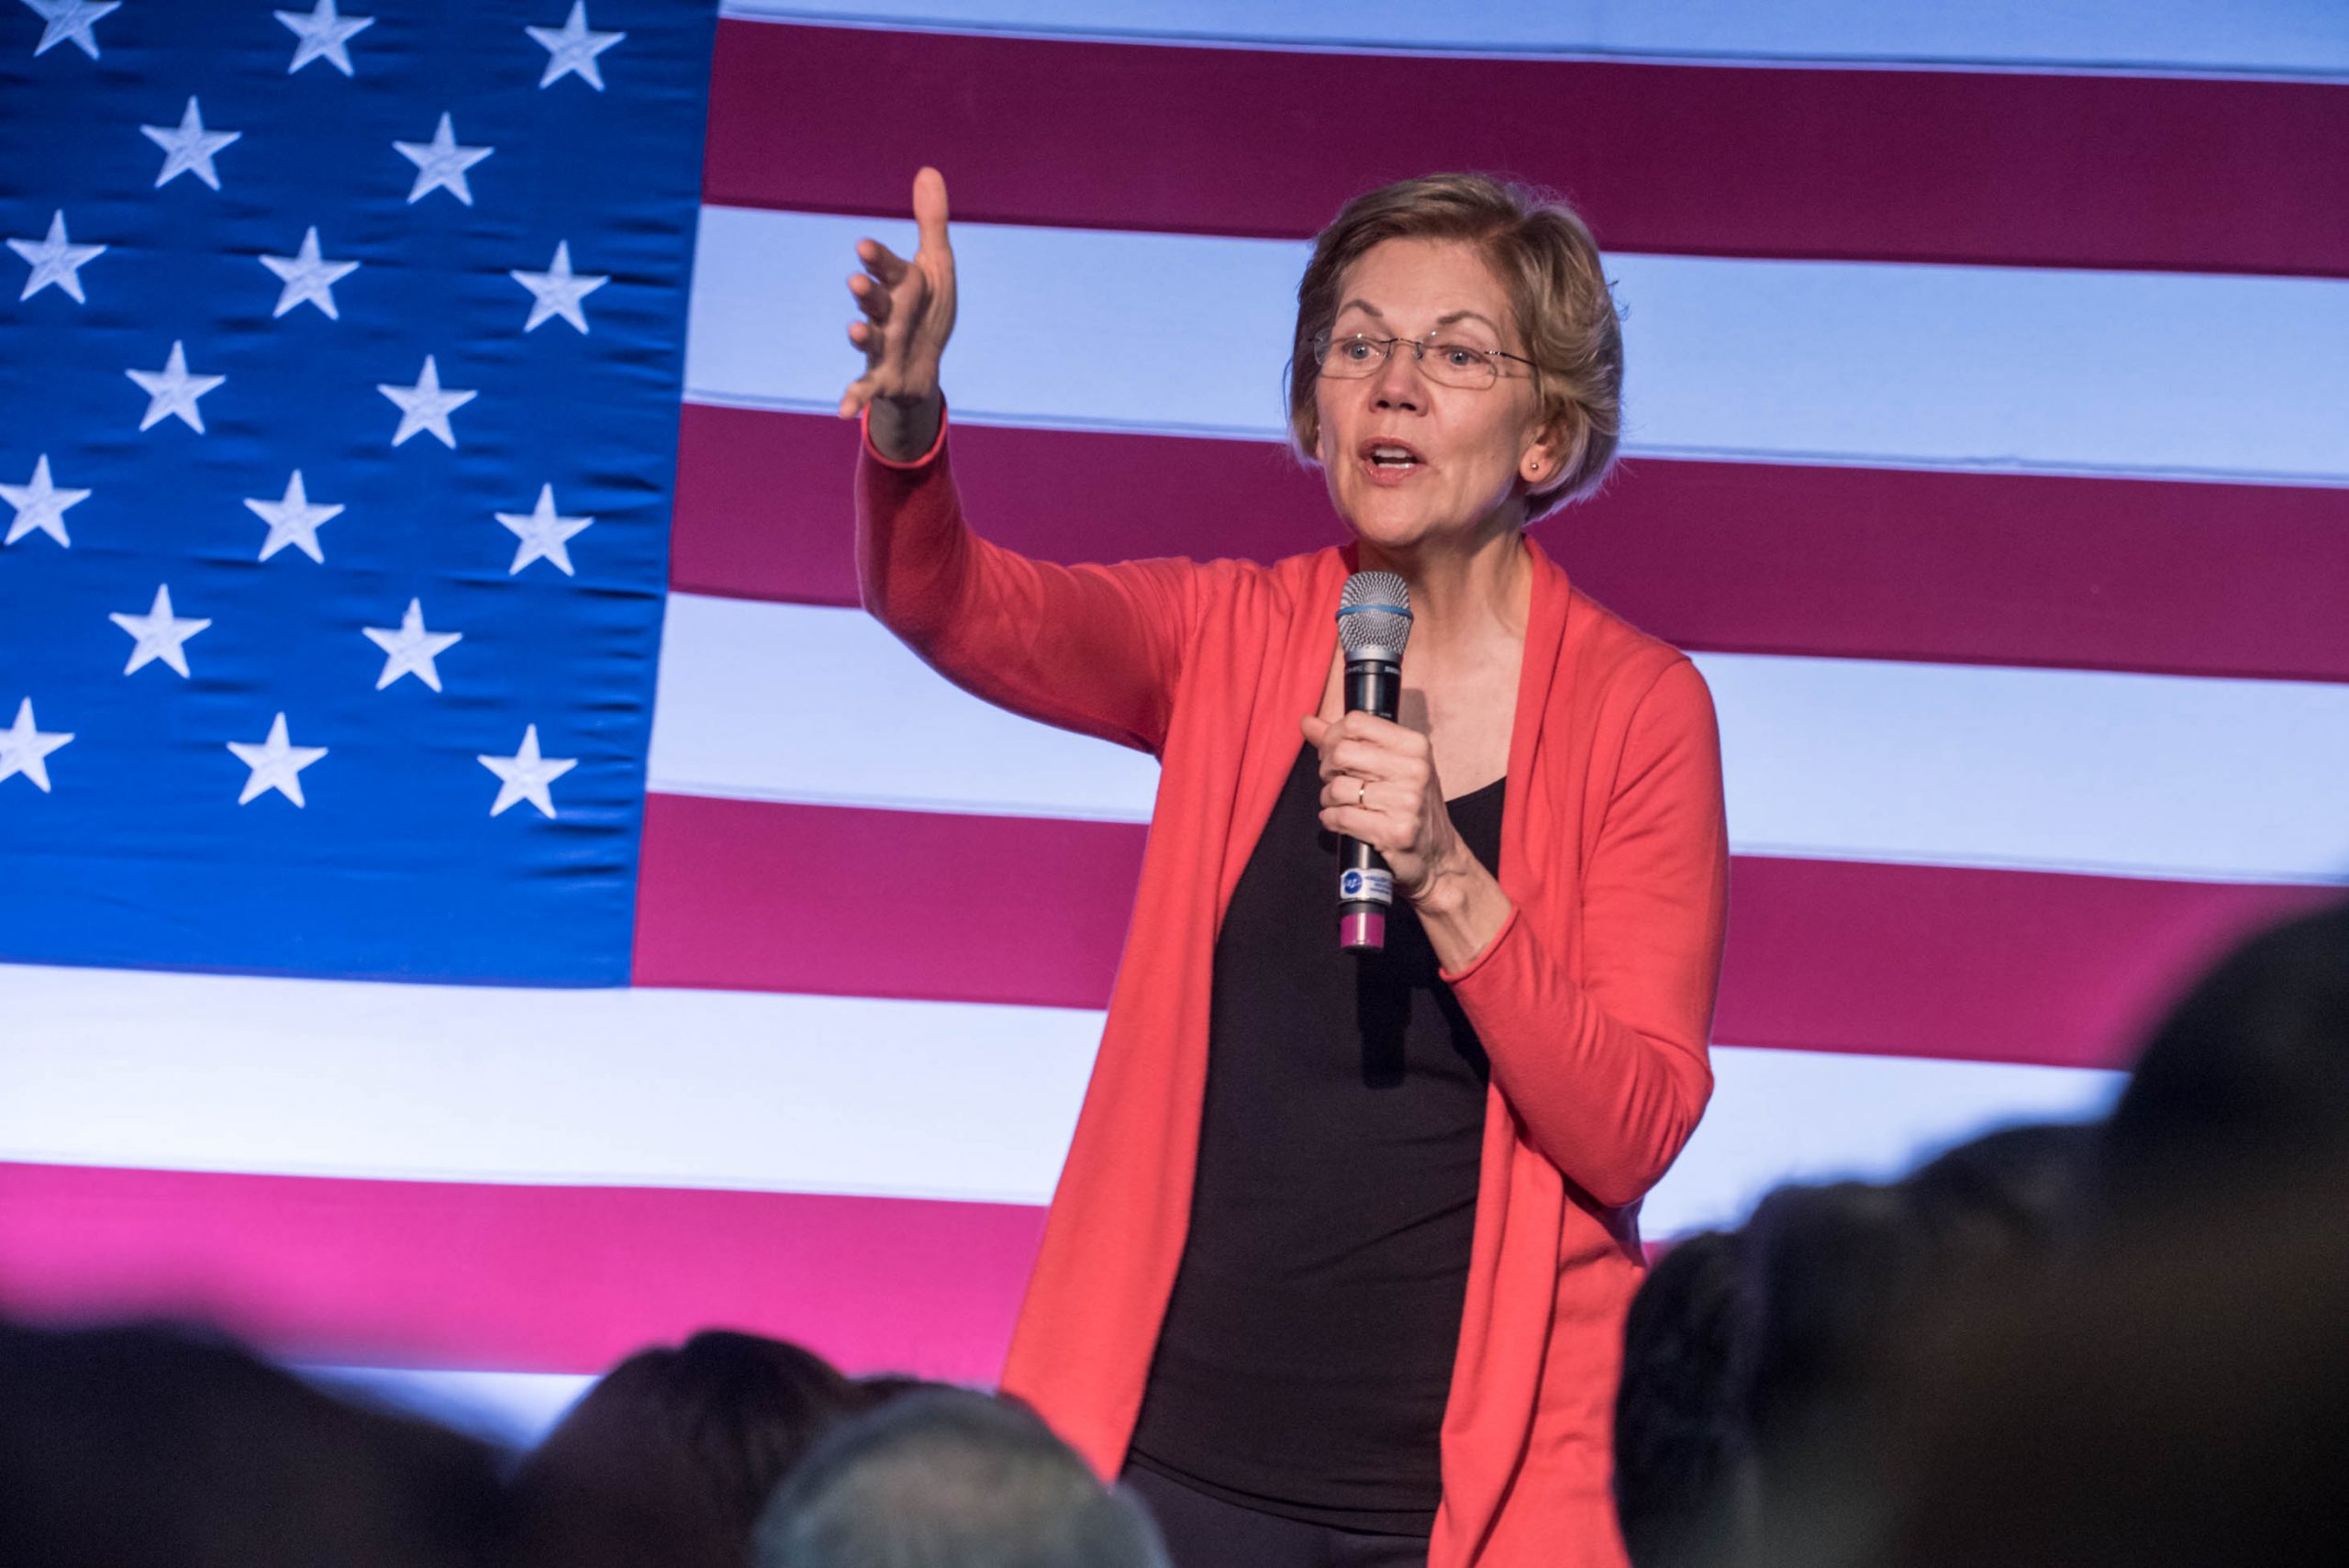 “MONEY IS CALLING THE SHOTS IN WASHINGTON”: WARREN PROMISES TO ACTUALLY DRAIN THE SWAMP